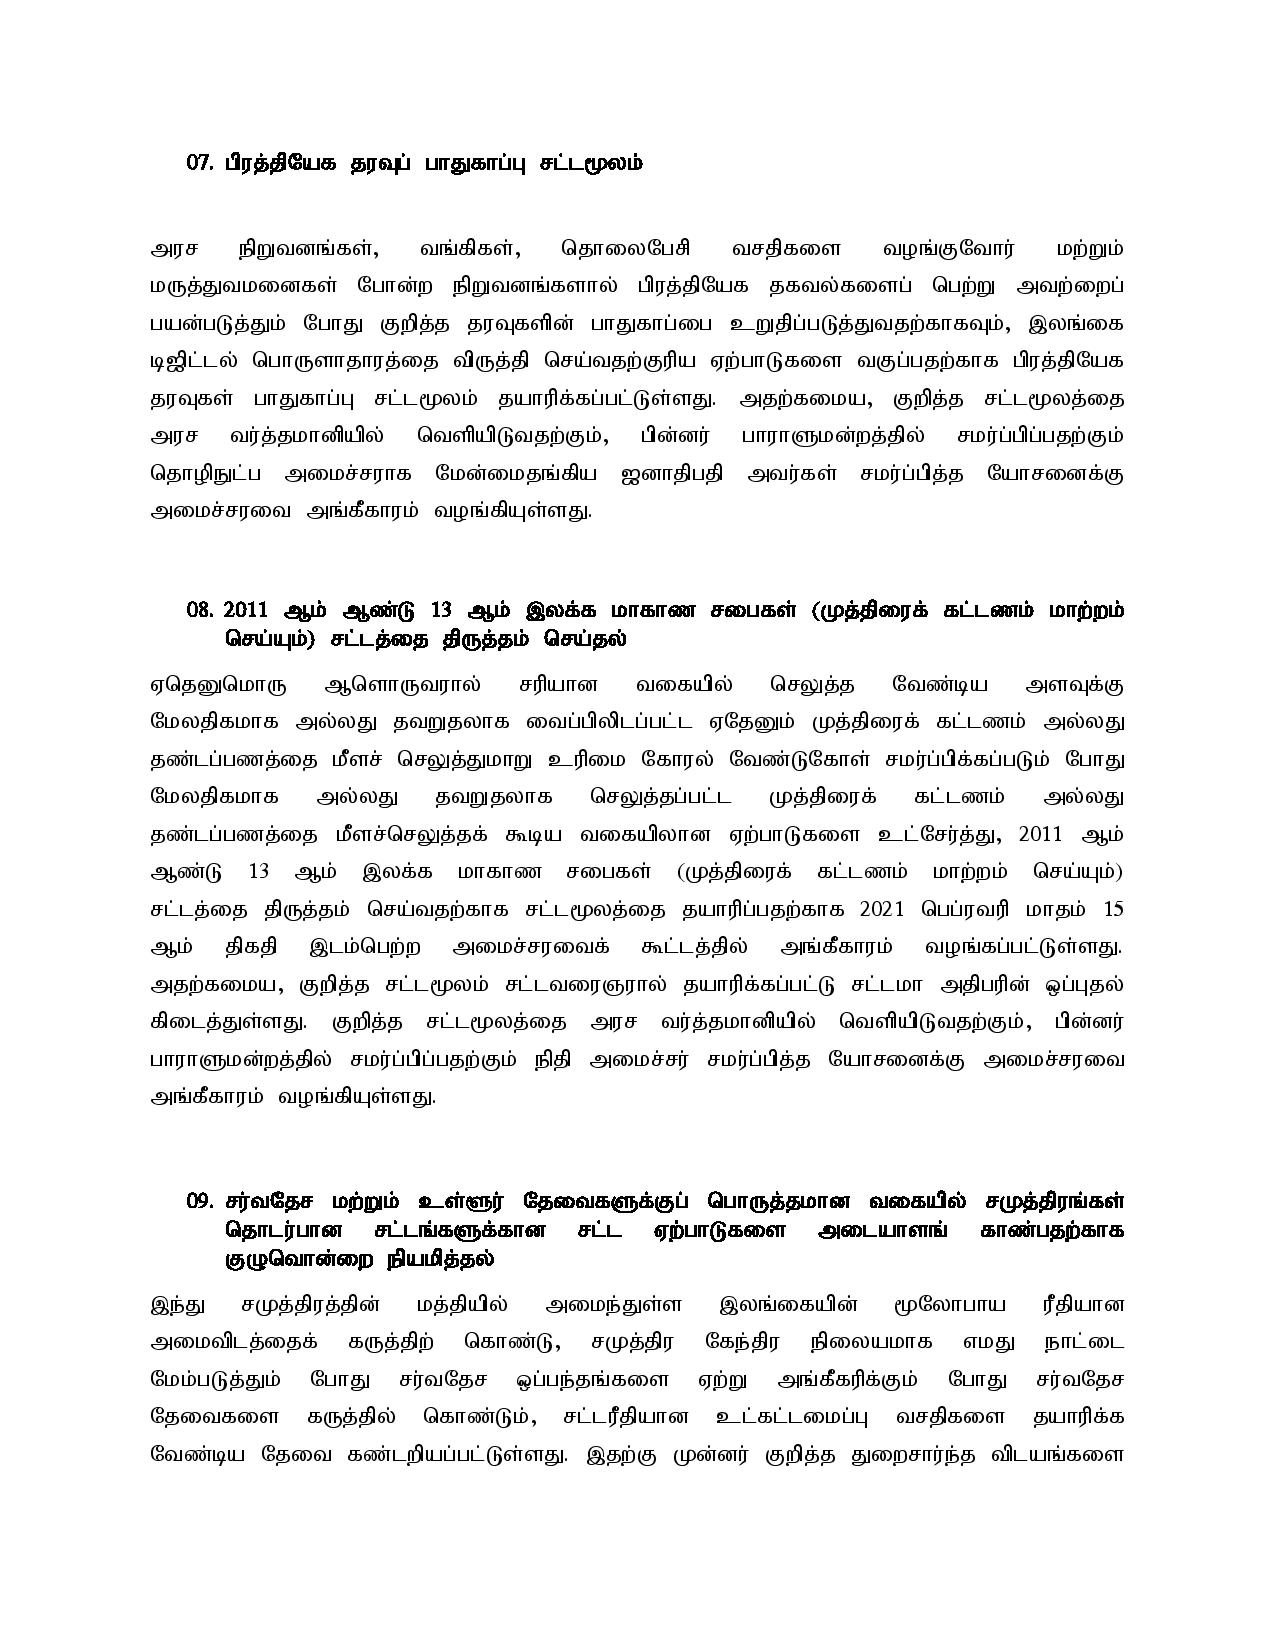 Cabinet Decision on 15.11.2021 Tamil page 004